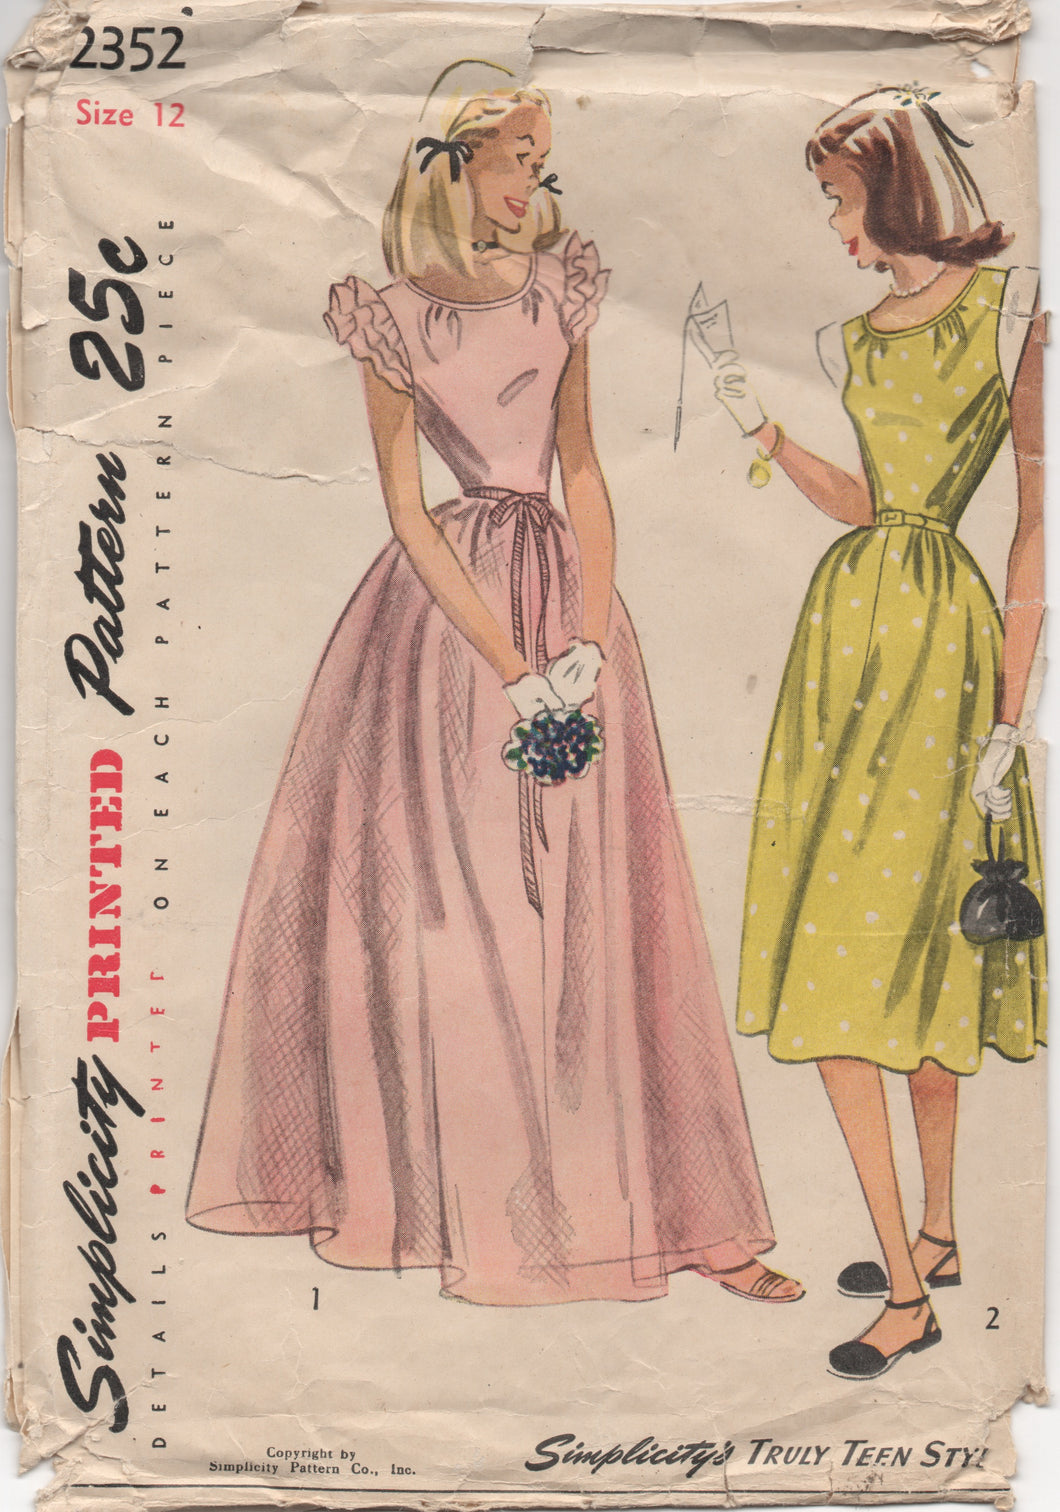 1950's Simplicity Junior's Daytime and Evening Dress pattern - Bust 30 - No. 2352